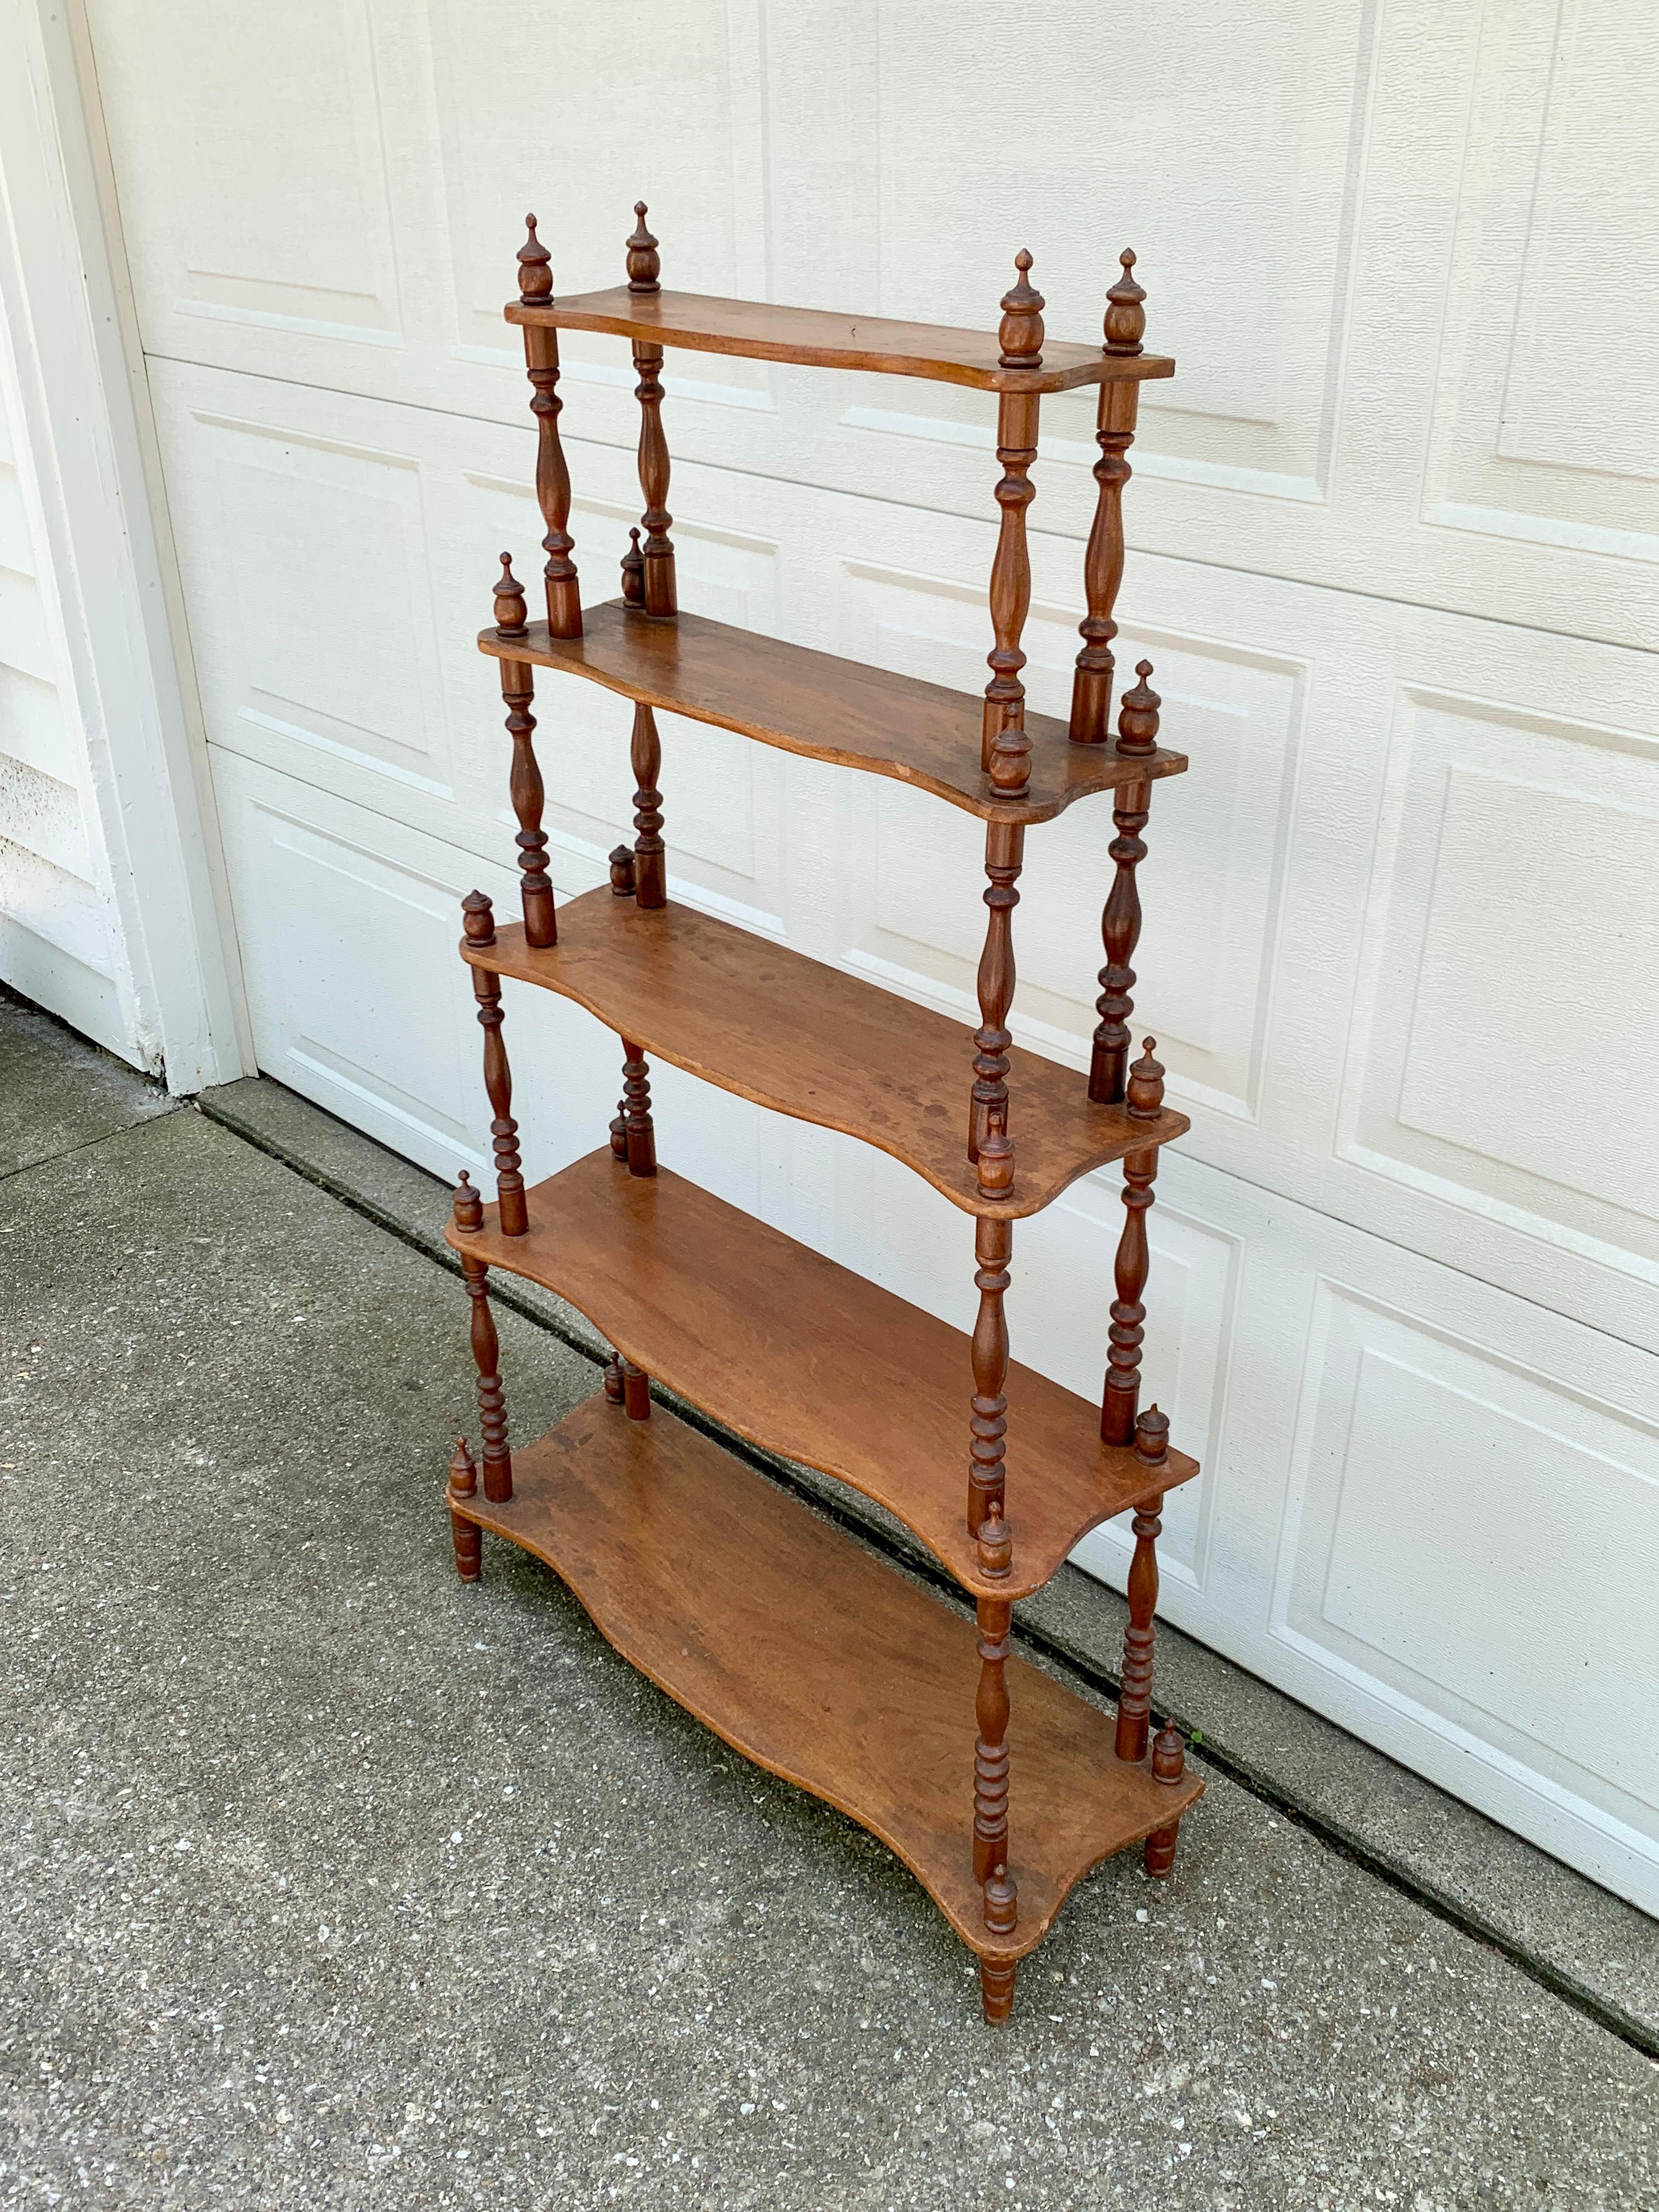 A gorgeous Victorian or American Colonial style cherry wood five shelf etagere or bookshelf with carved finial details

USA, circa late 19th century

Measures: 31.75